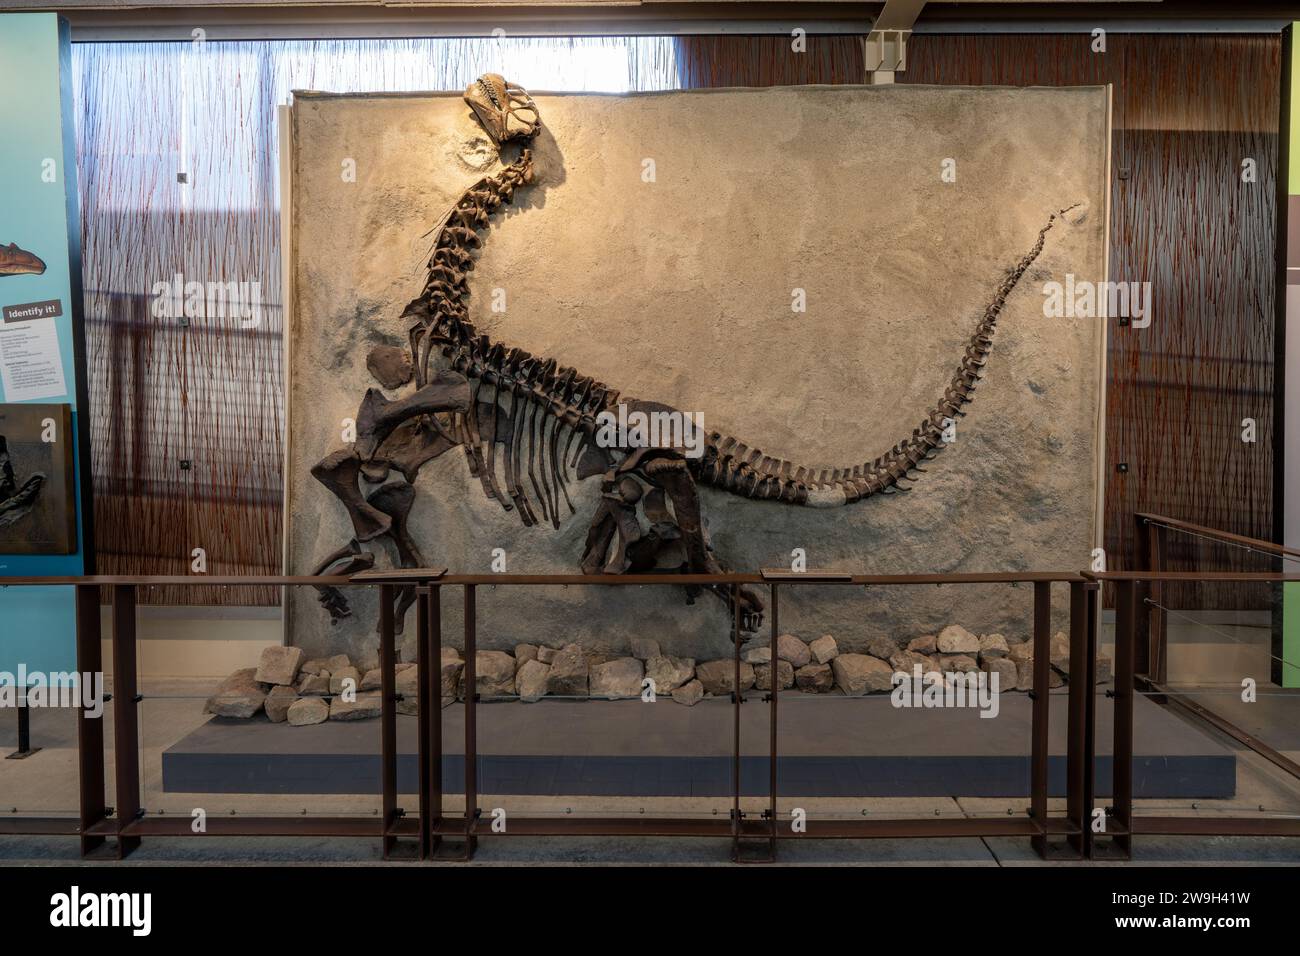 Fossilized skeleton of a young camarasaurus in the Quarry Exhibit Hall of Dinosaur National Monument in Utah.  This is the most complete sauropod skel Stock Photo